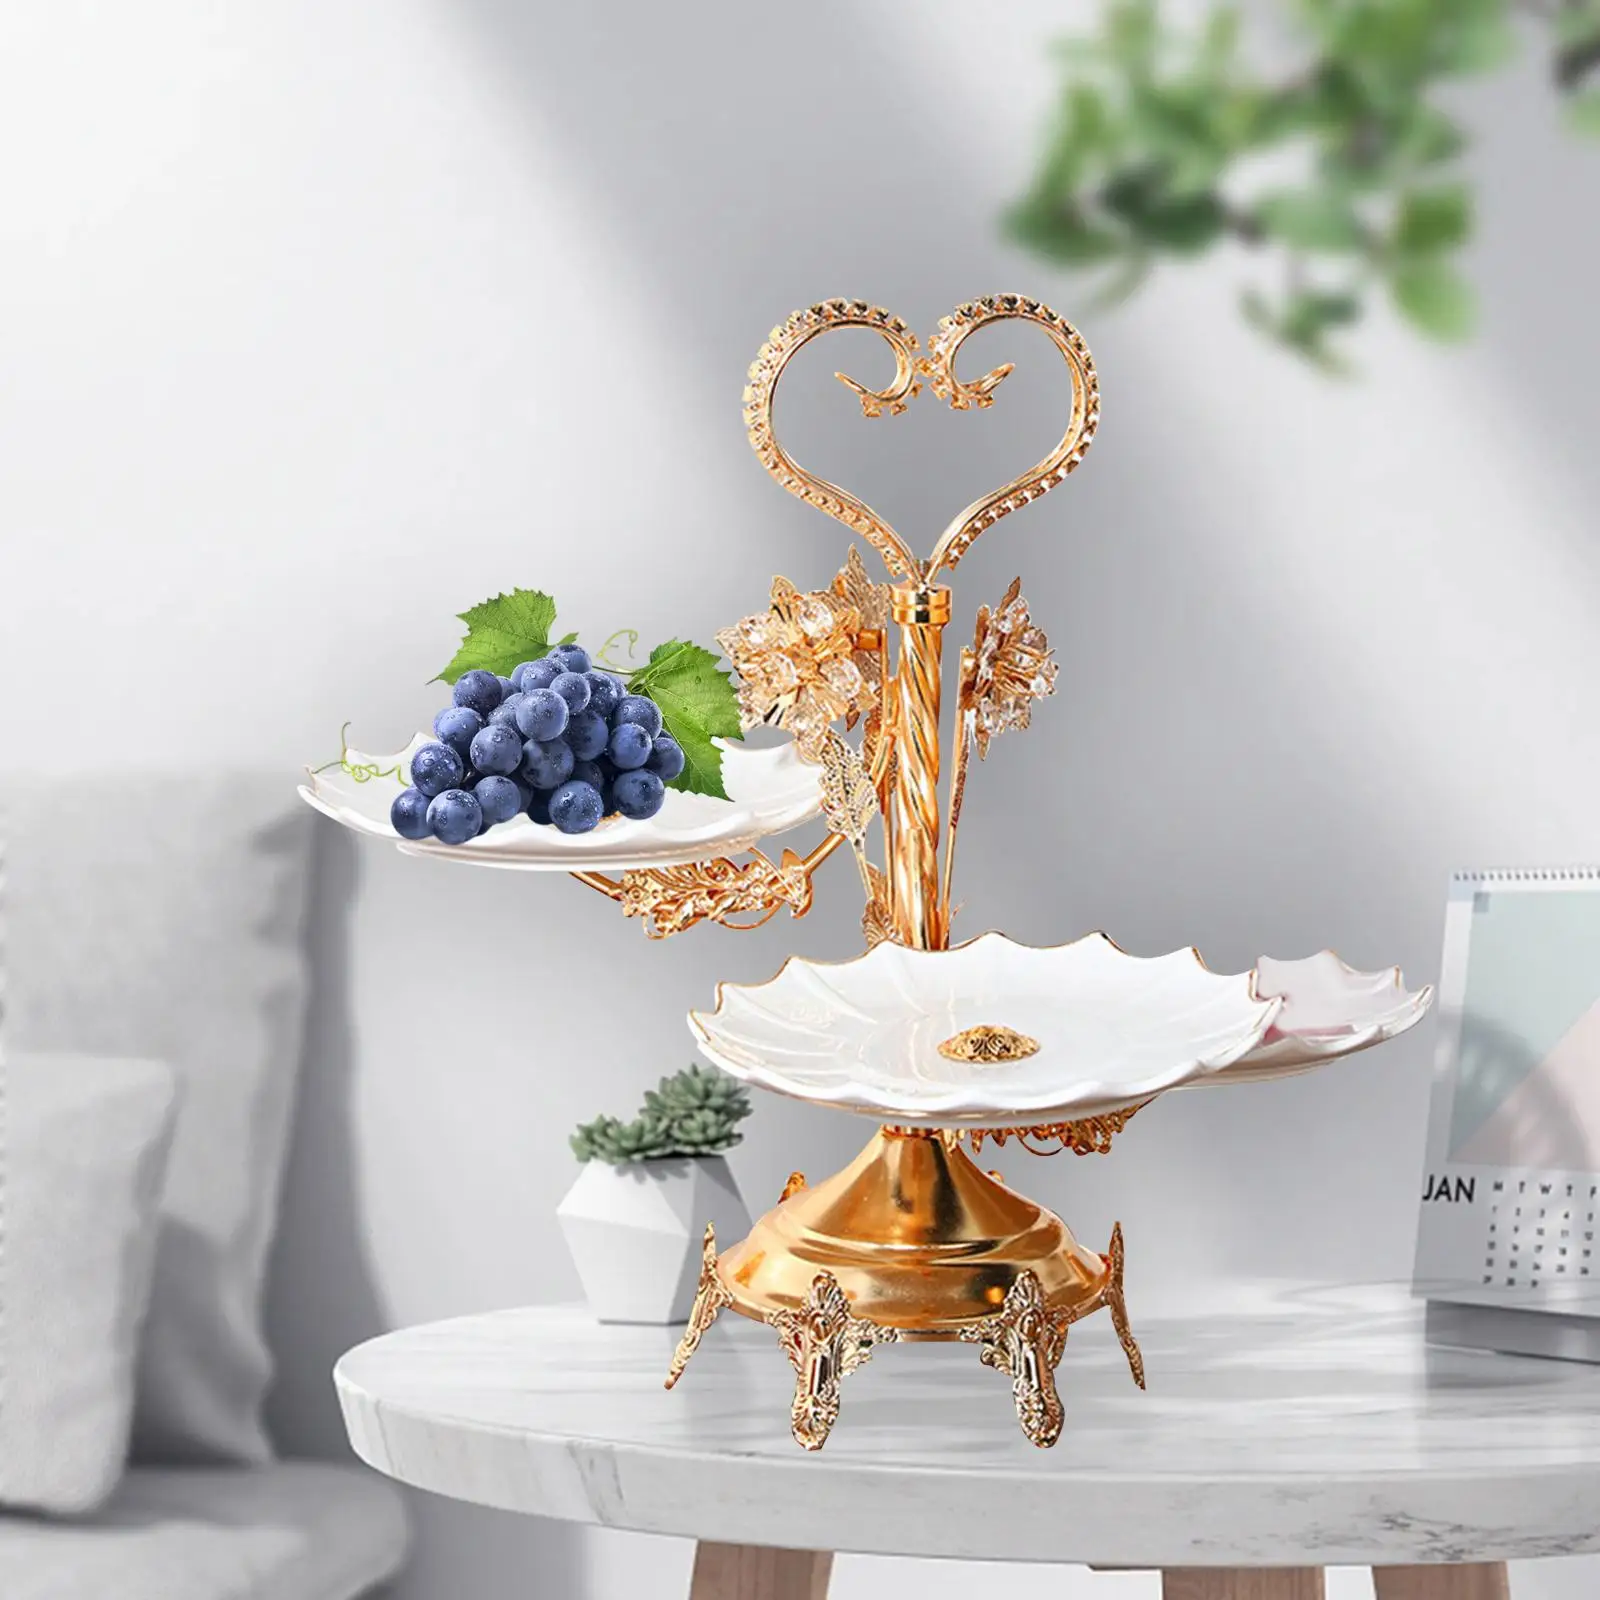 3 Layer Fruit Plate Ceramics Tiered Cupcake Stand for Fruit Living Room Home